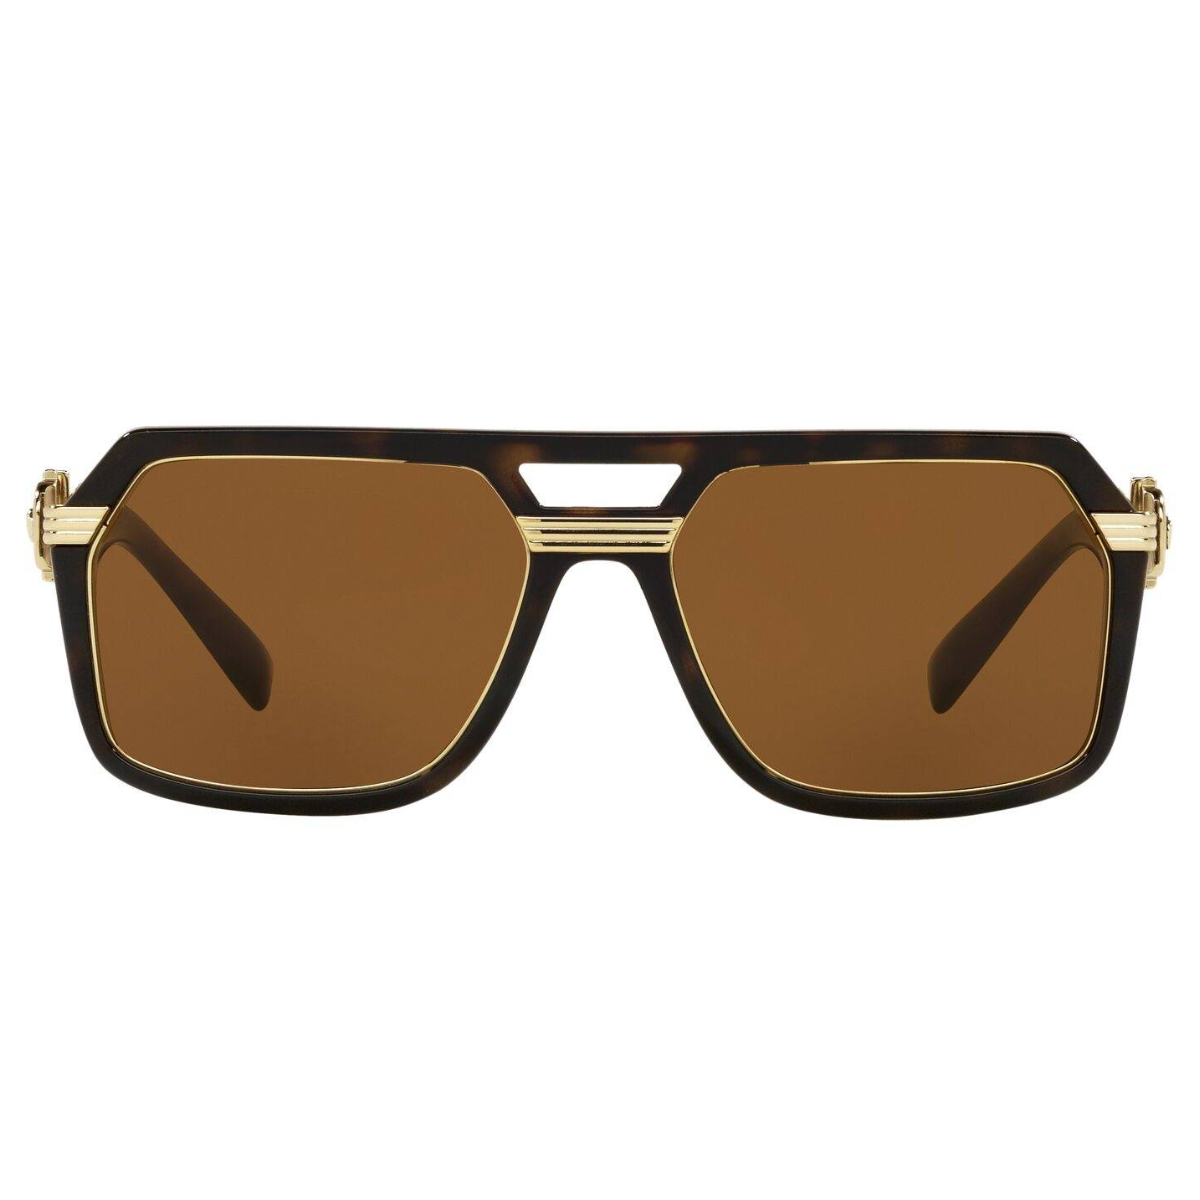 " Versace 4399 108/73 Sunglass: Trendy square shades for men with non-polarized brown lens and dark havana temples. Elevate your style with Optorium's designer eyewear. optorium"